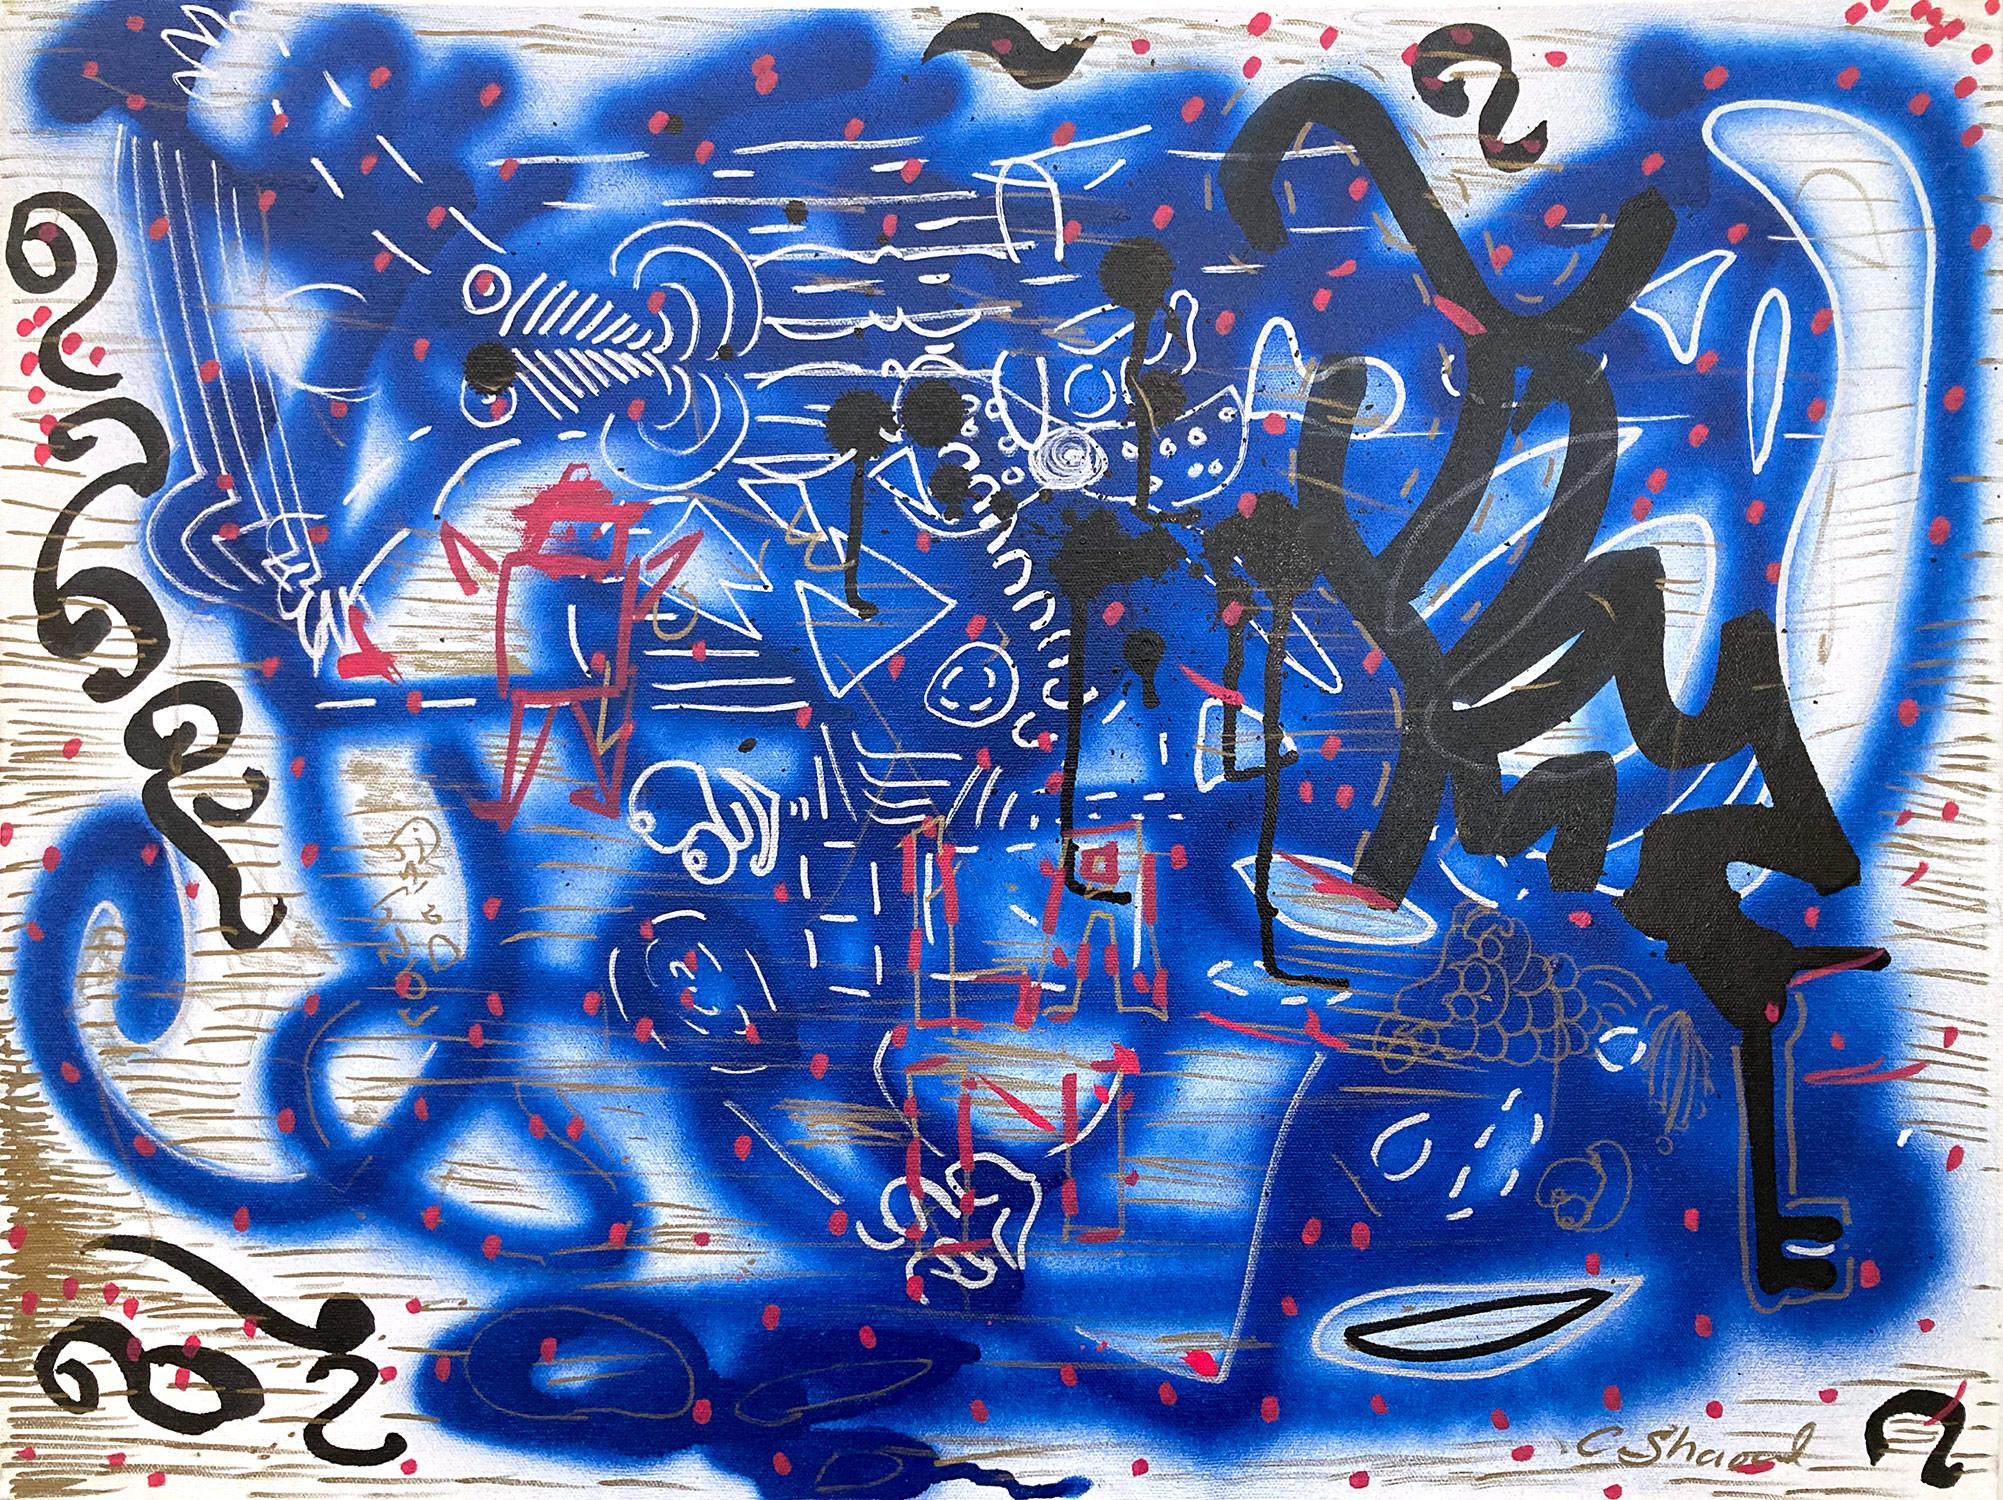 LA II (Angel Ortiz) Abstract Painting - "Music Box" Decorated Graffiti Street Art Acrylic Spray Paint and Ink on Canvas